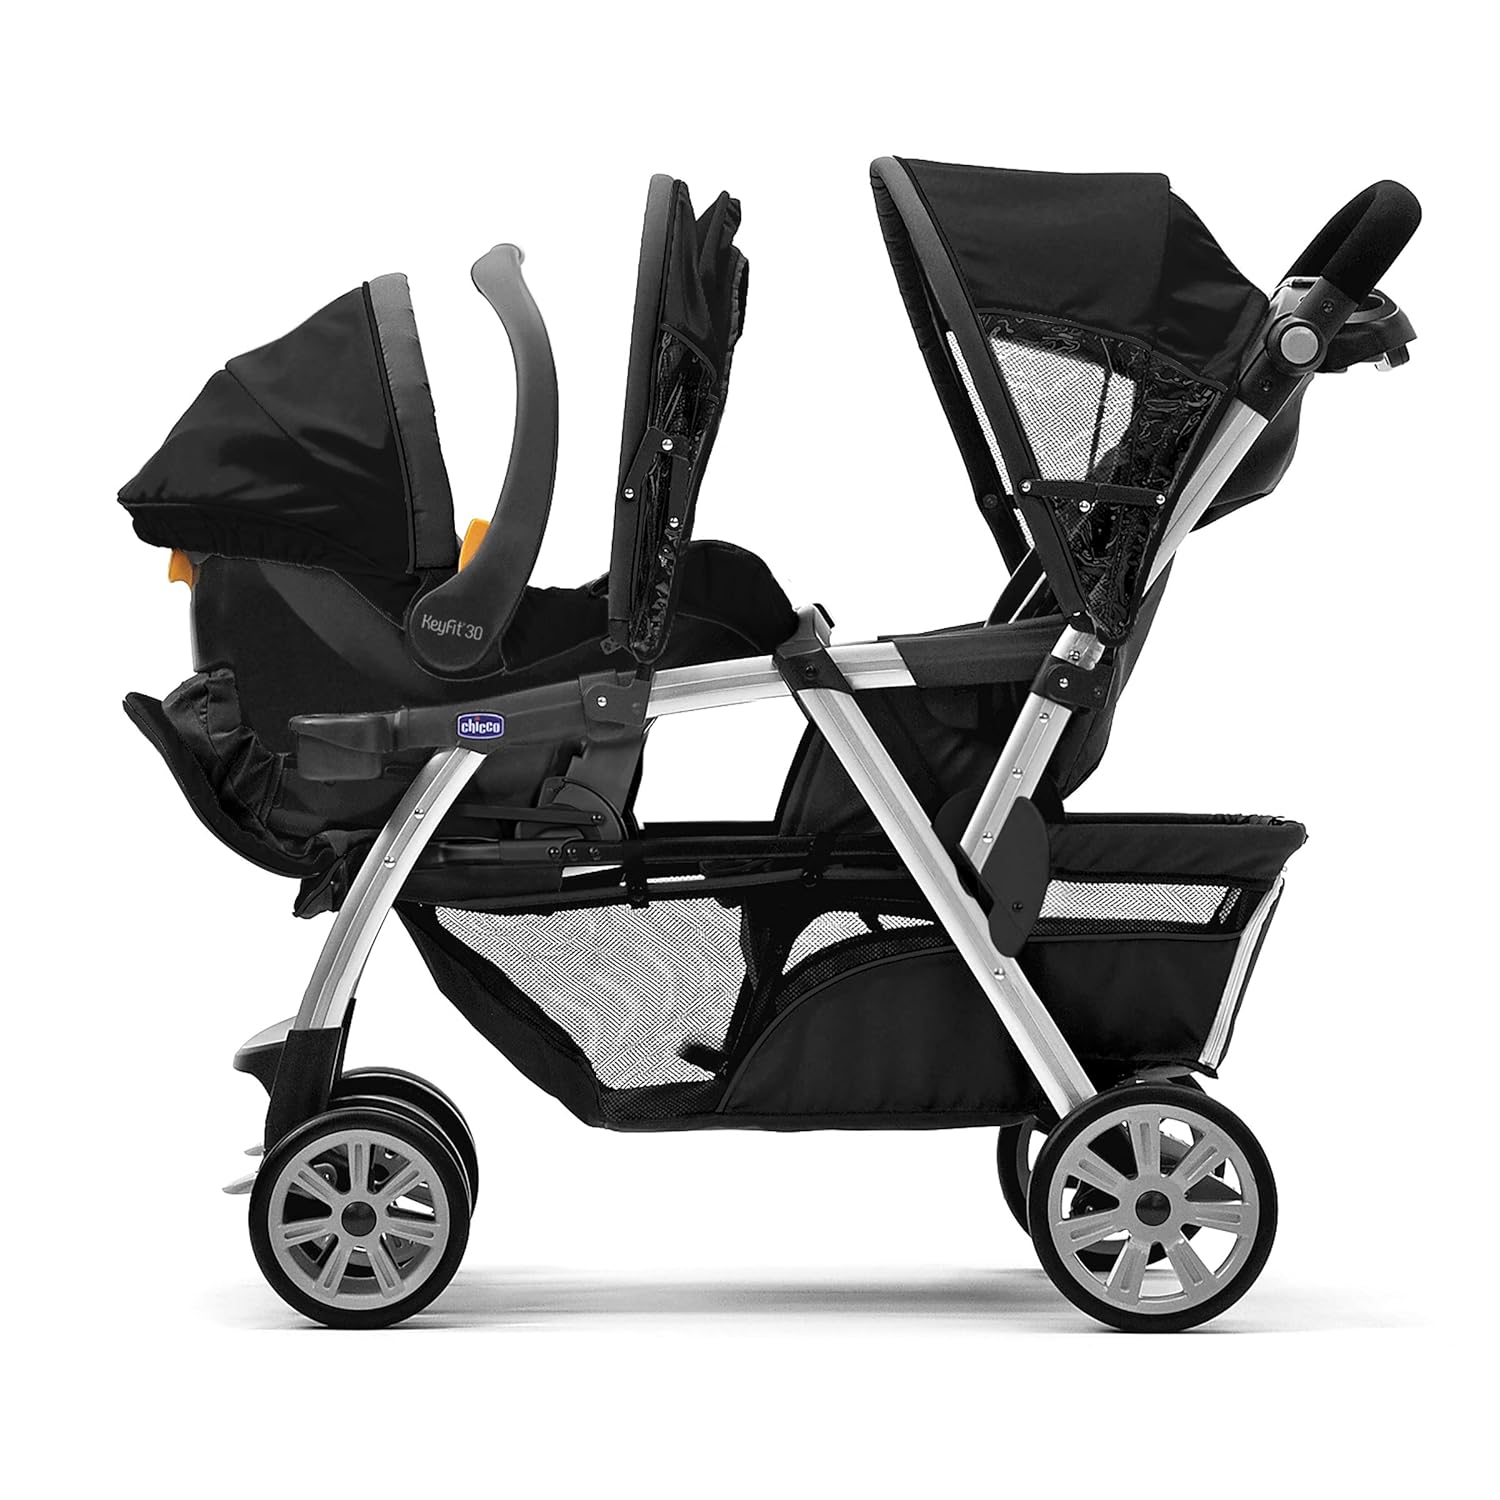 Chicco Cortina Together Double Stroller, Minerale - Chicco Cortina Together Double Stroller, Minerale Review